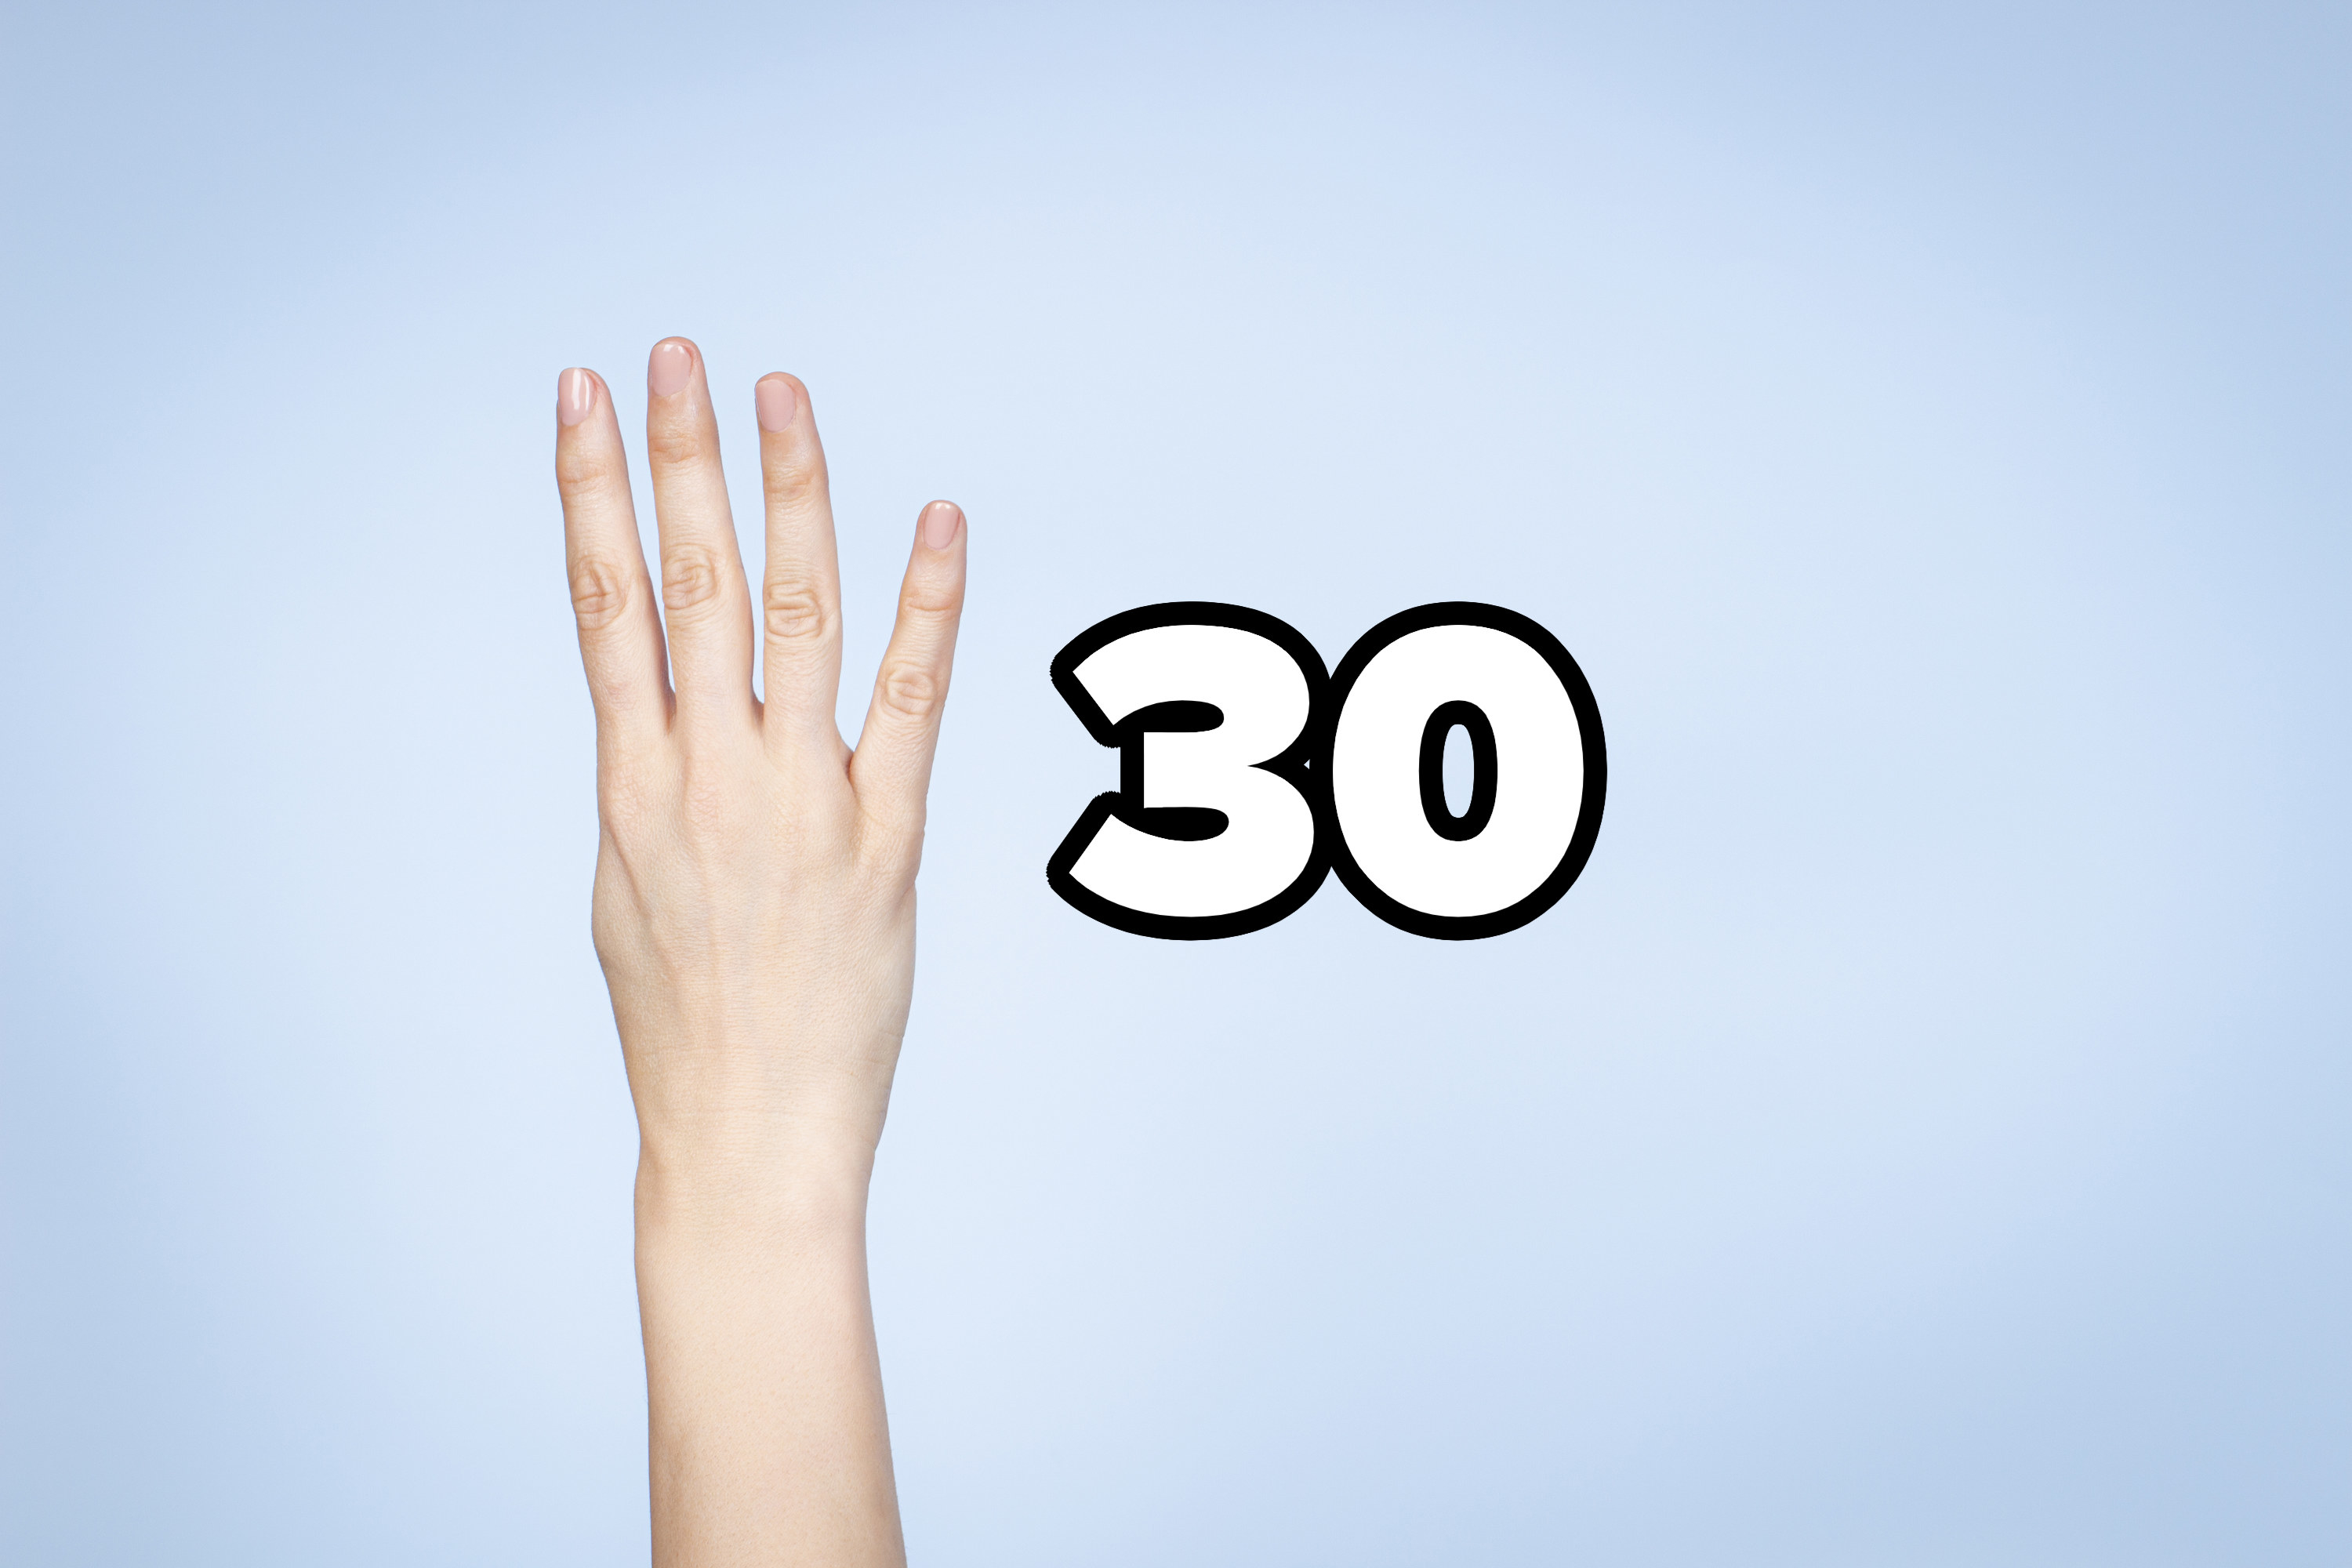 Hand holding up 4 fingers overlaid with &quot;30&quot;